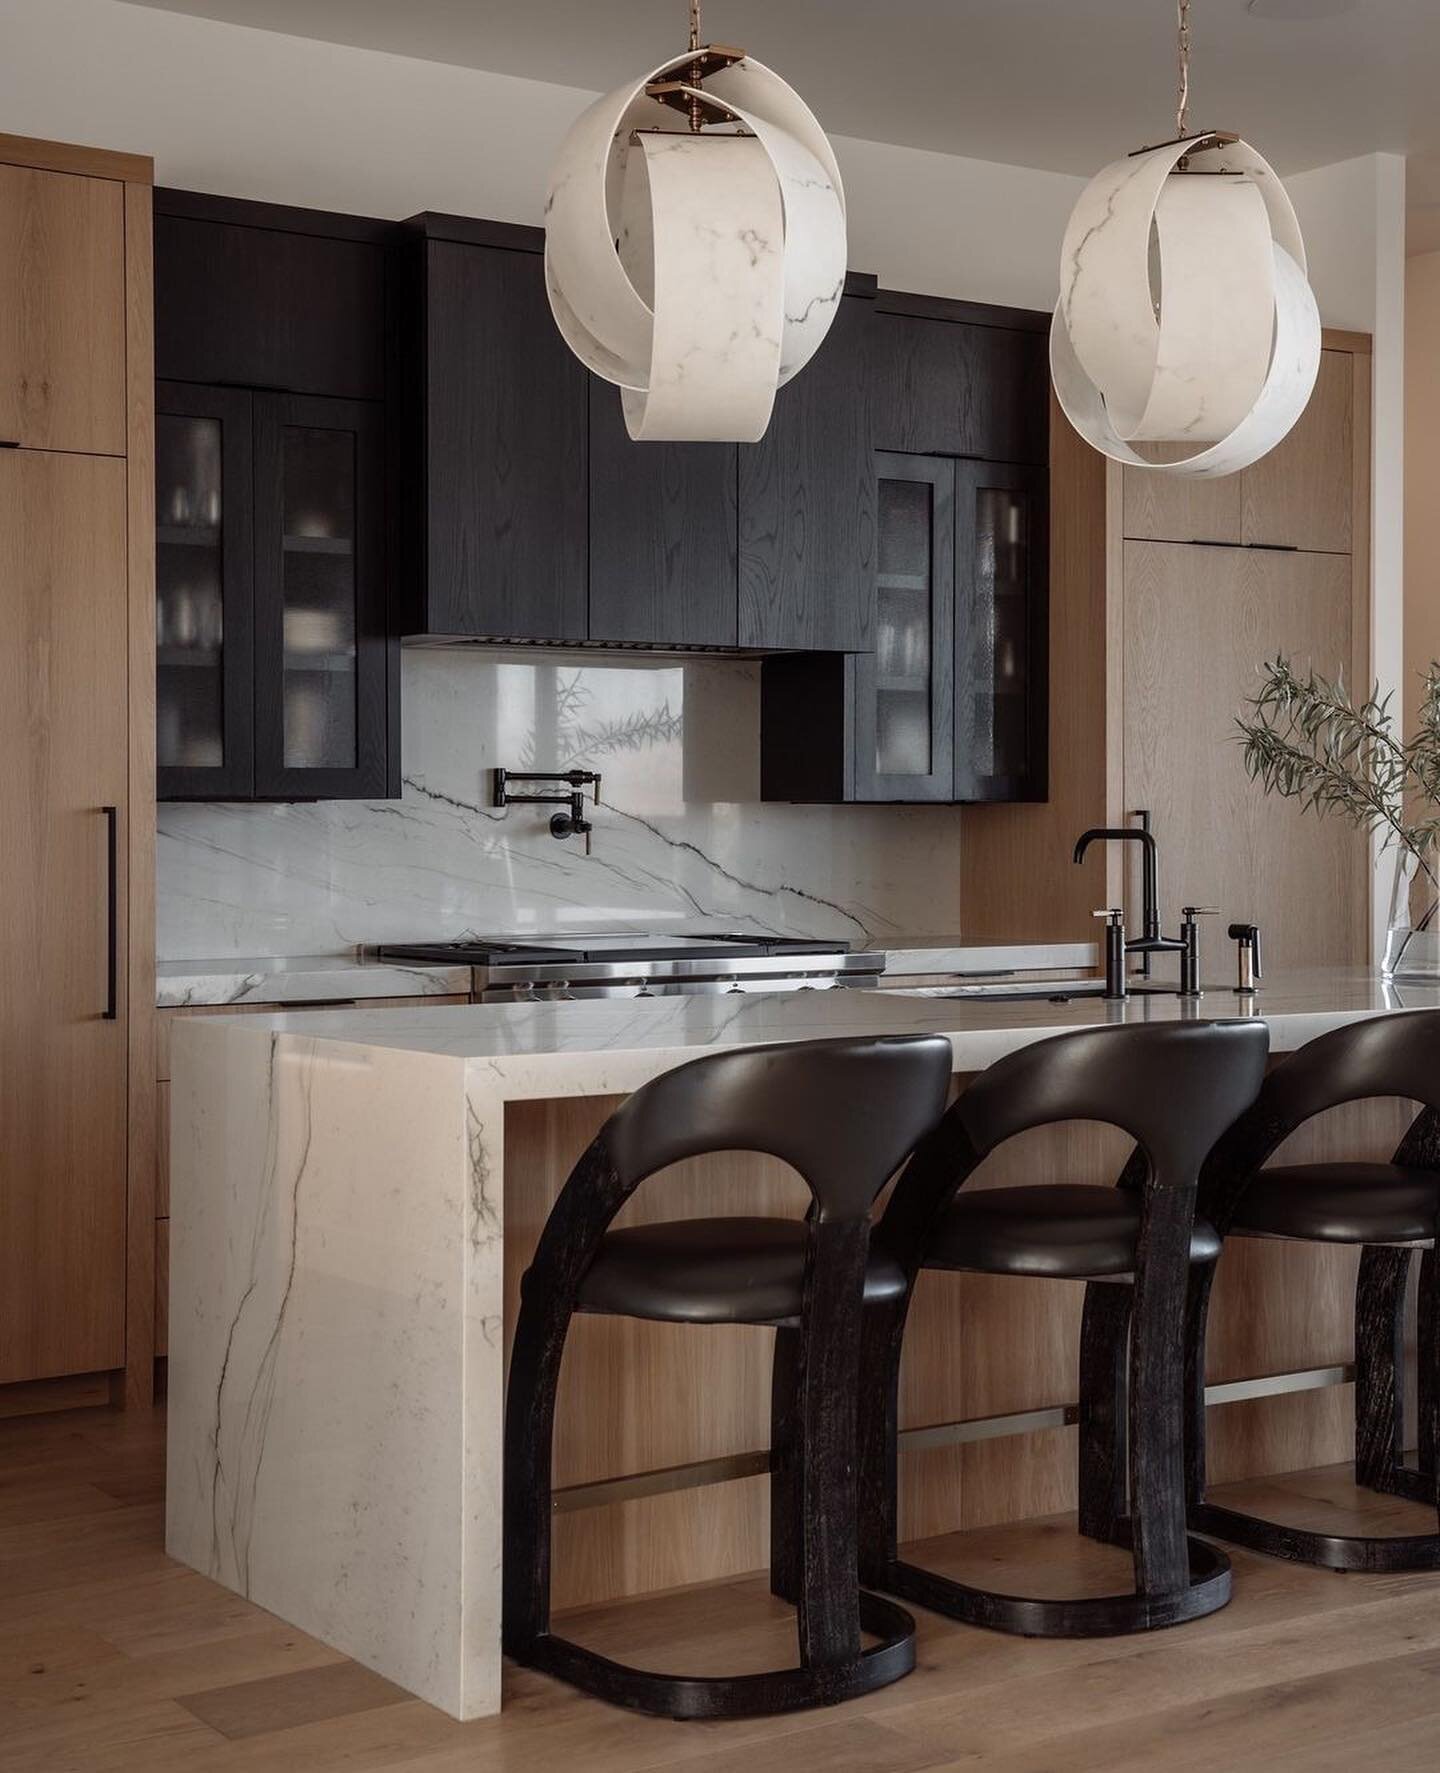 All about the details in this striking kitchen by @housewestdesign